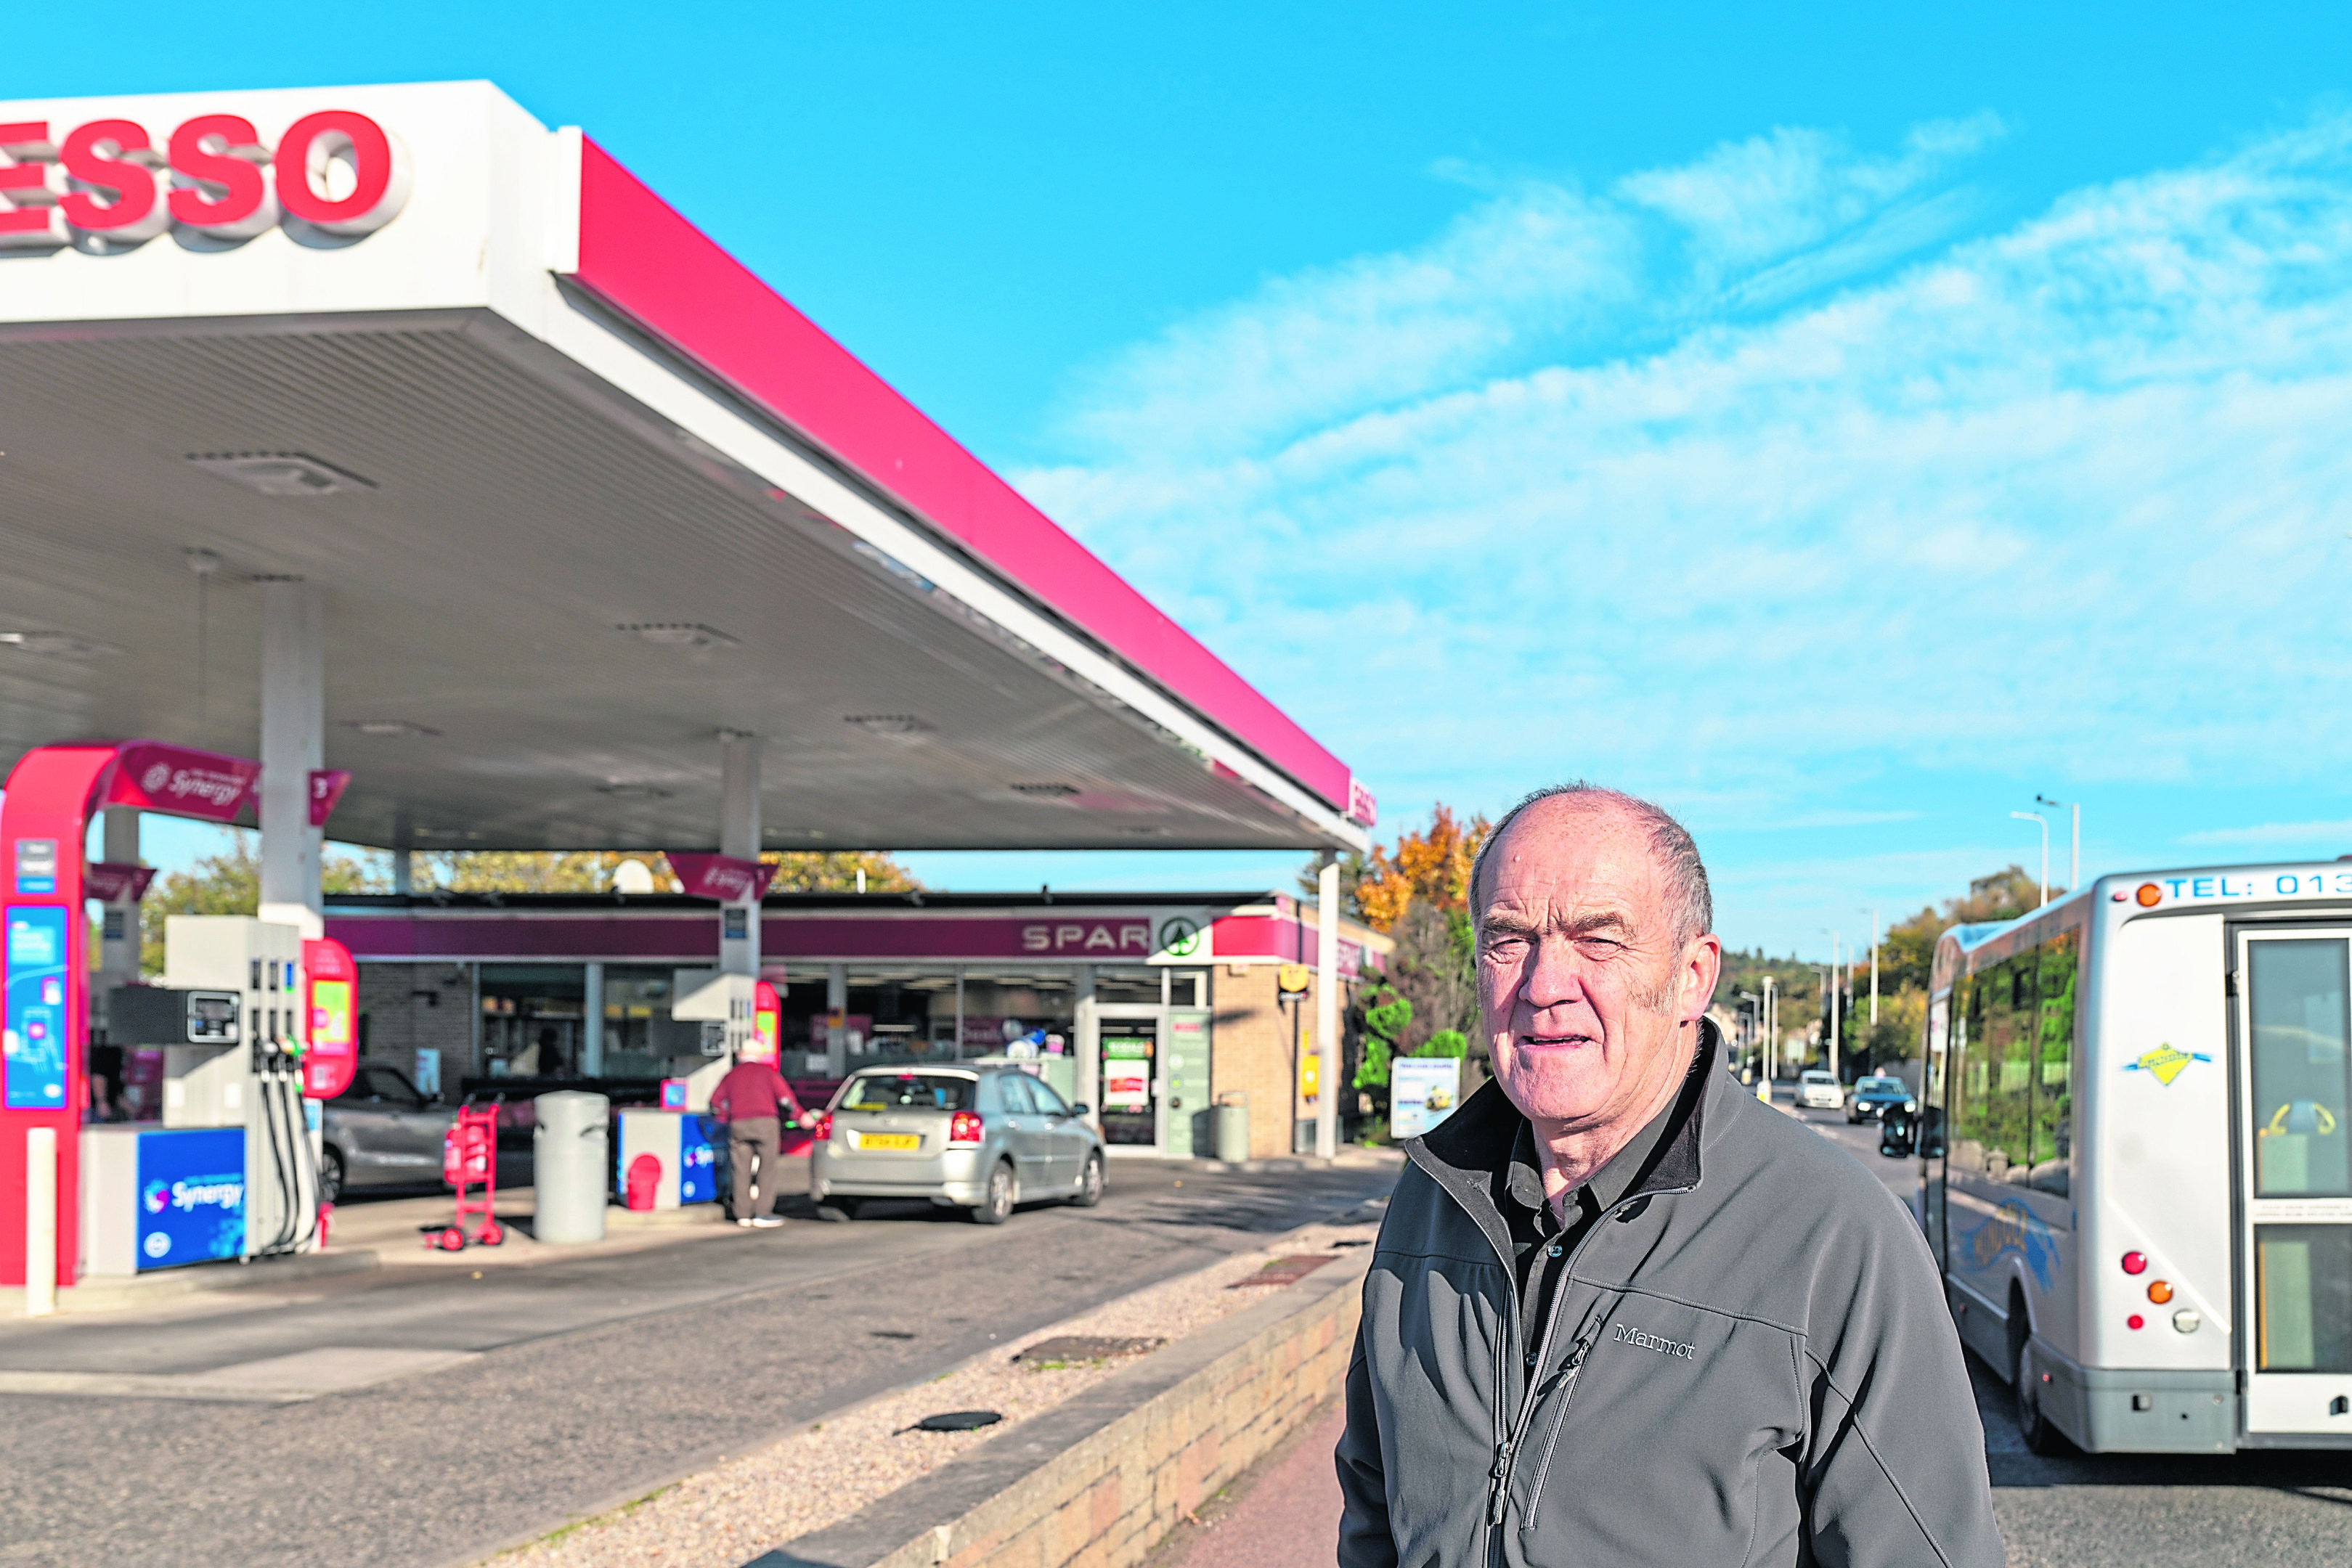 Cllr George Alexander from Forres outside the Esso Filling Station on Nairn Road, Forres, Moray.